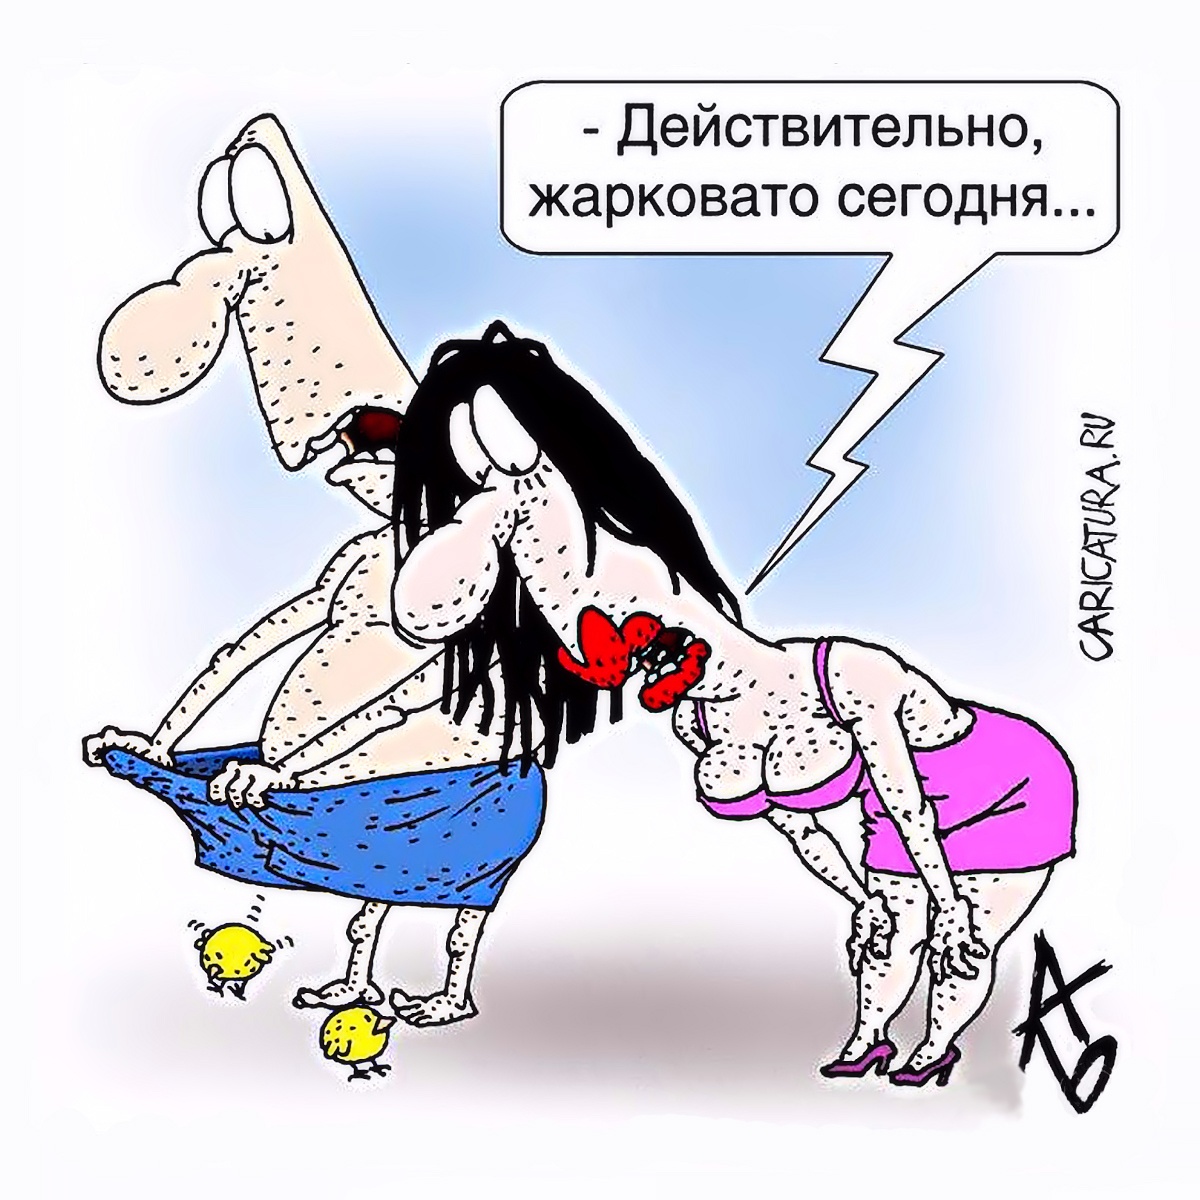 00 Andrei Buzov. It was a Hot Day. Russian eggs cartoon. 19.10.13